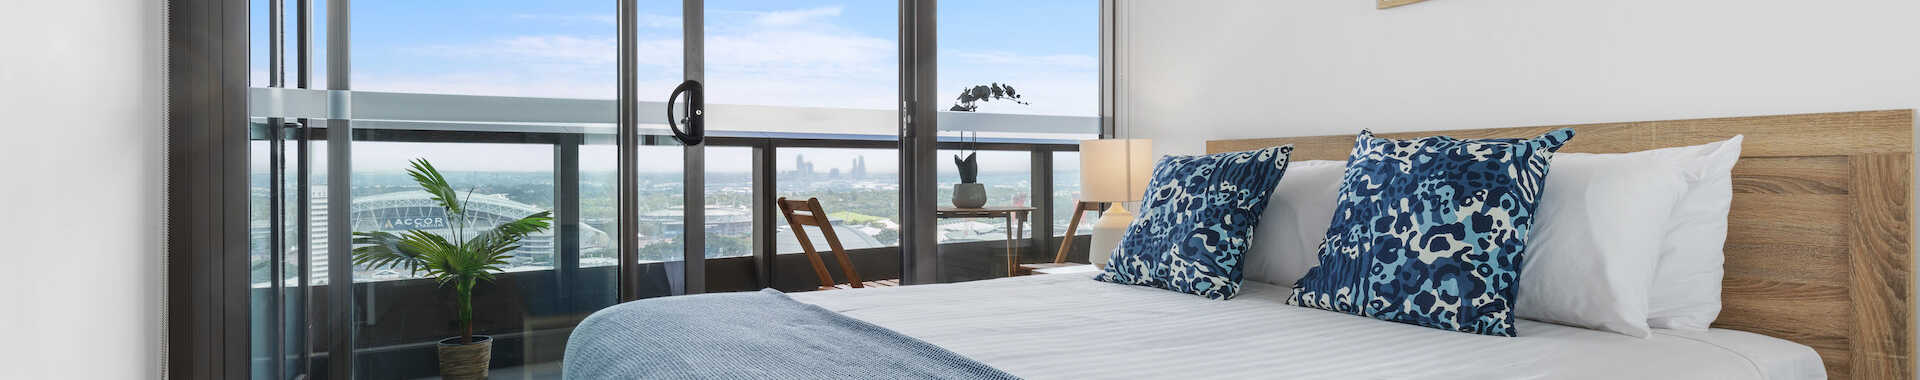 Master bedroom in long-stay accommodation Olympic Park - Astra Apartments